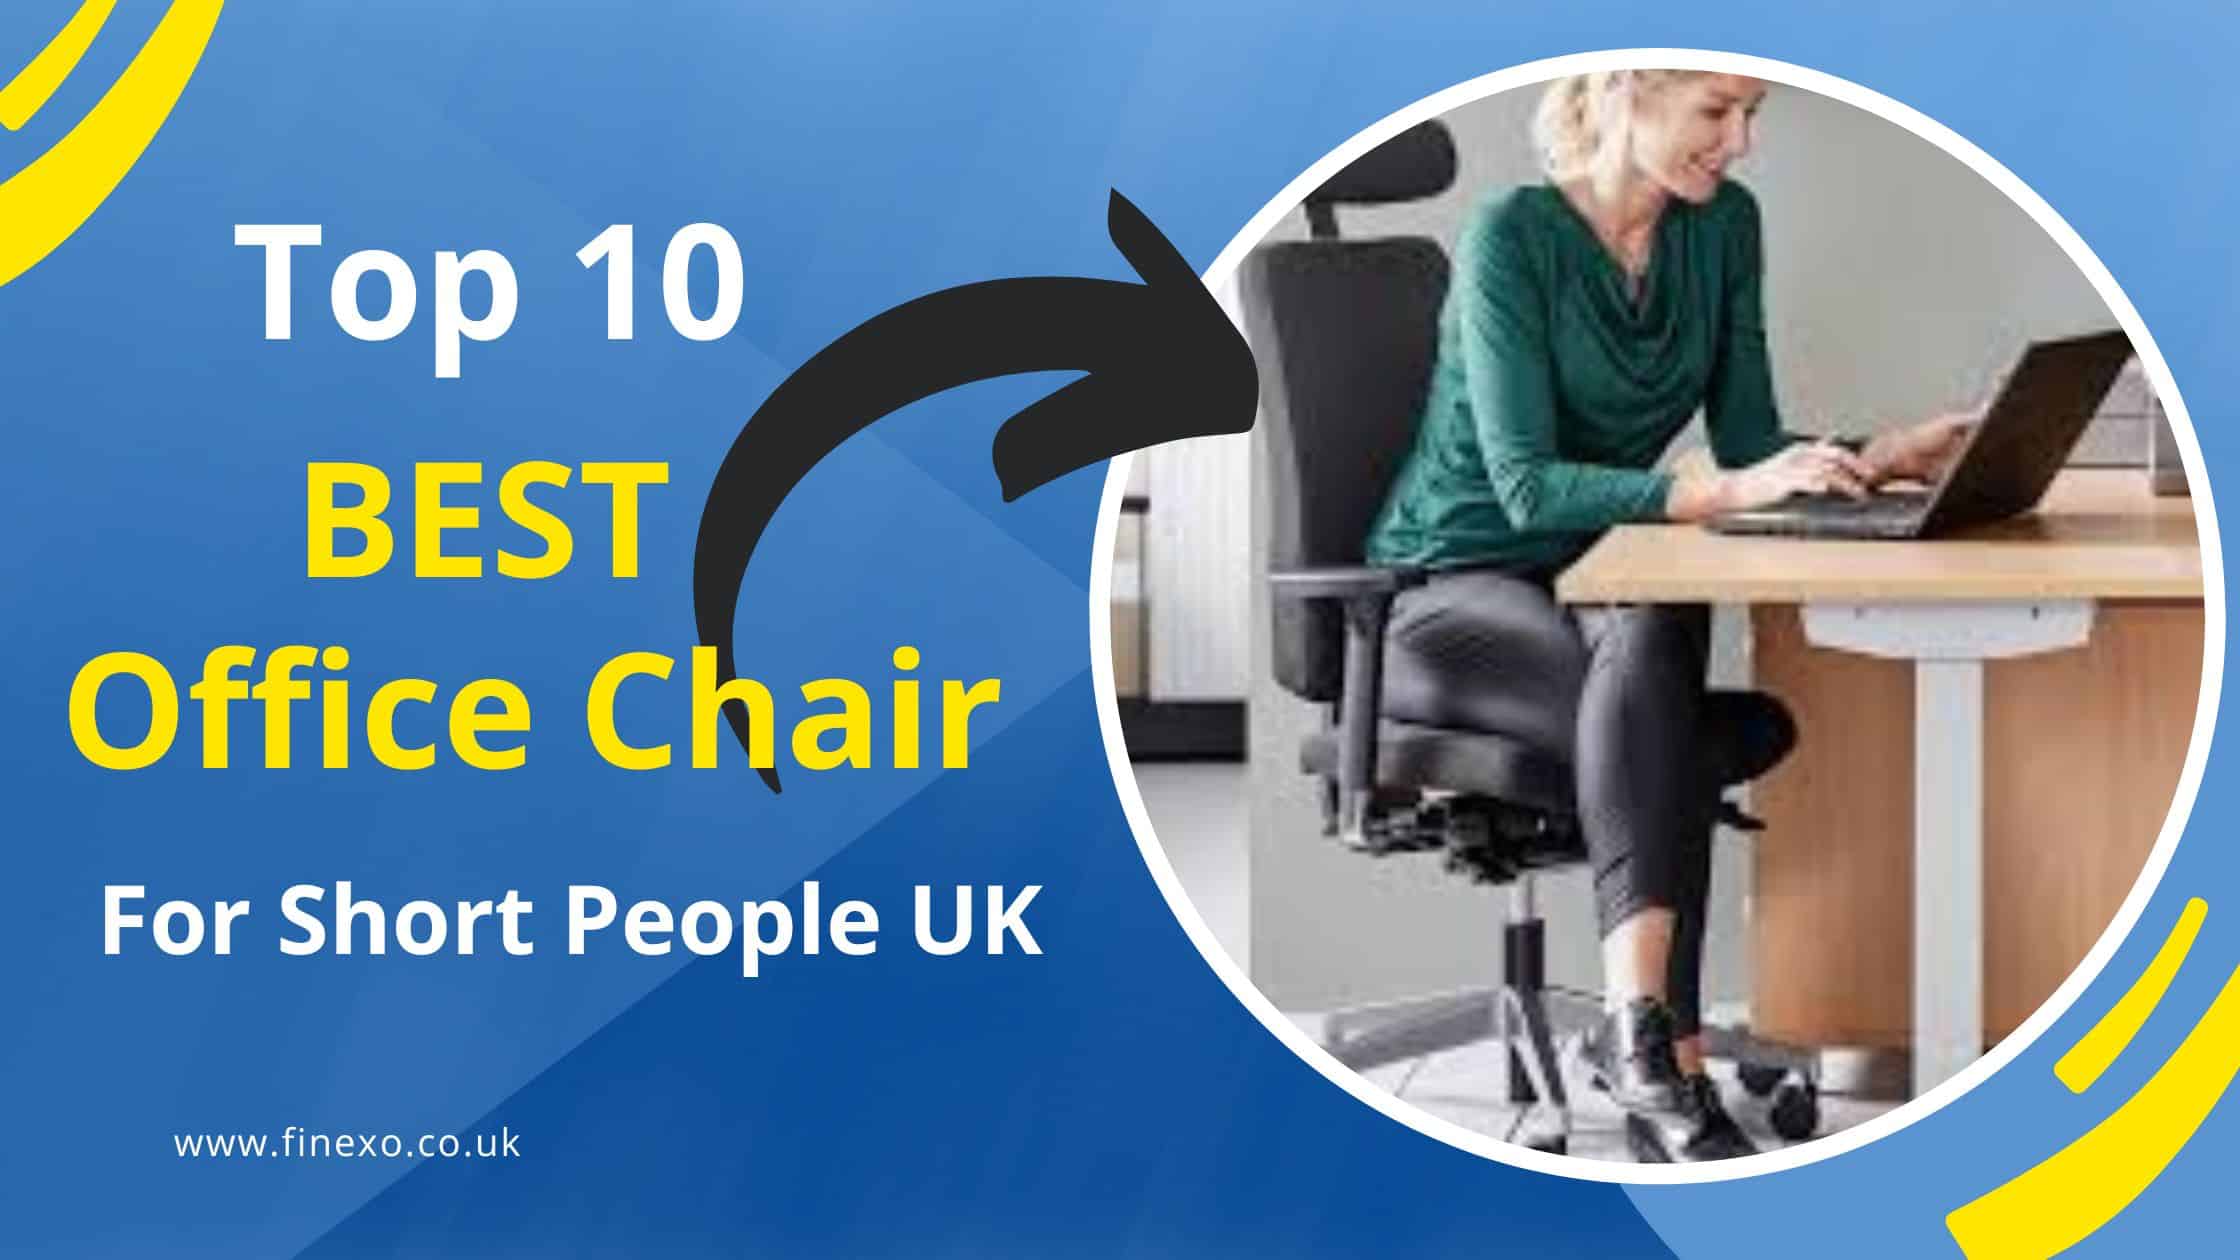 Top 10 Best Office Chair For Short People UK